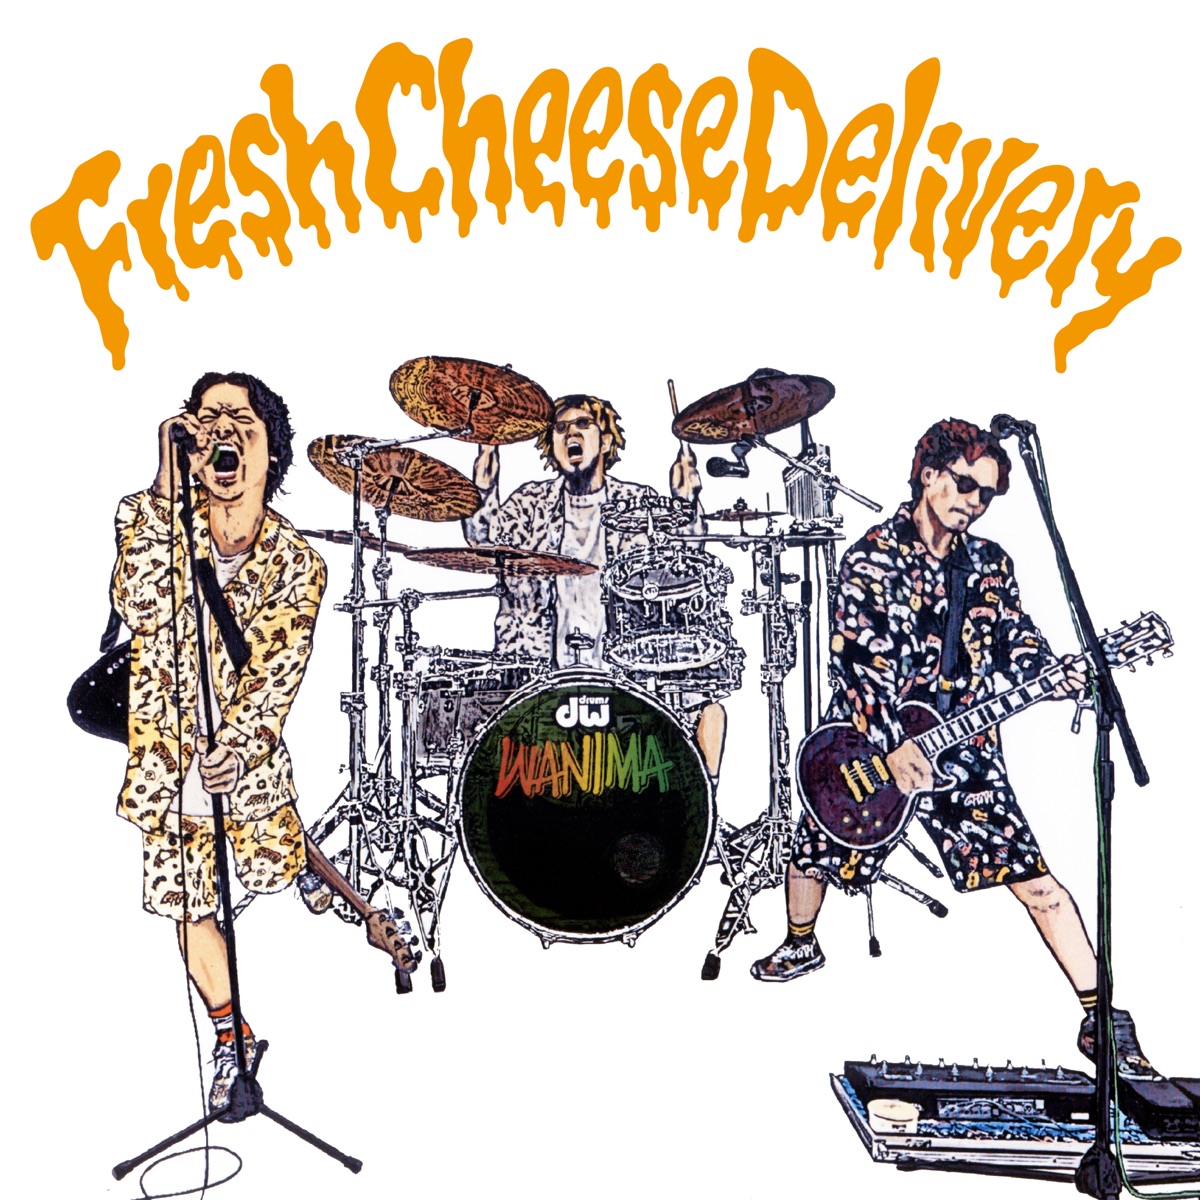 Cover art for『WANIMA - Brand New Day』from the release『Fresh Cheese Delivery